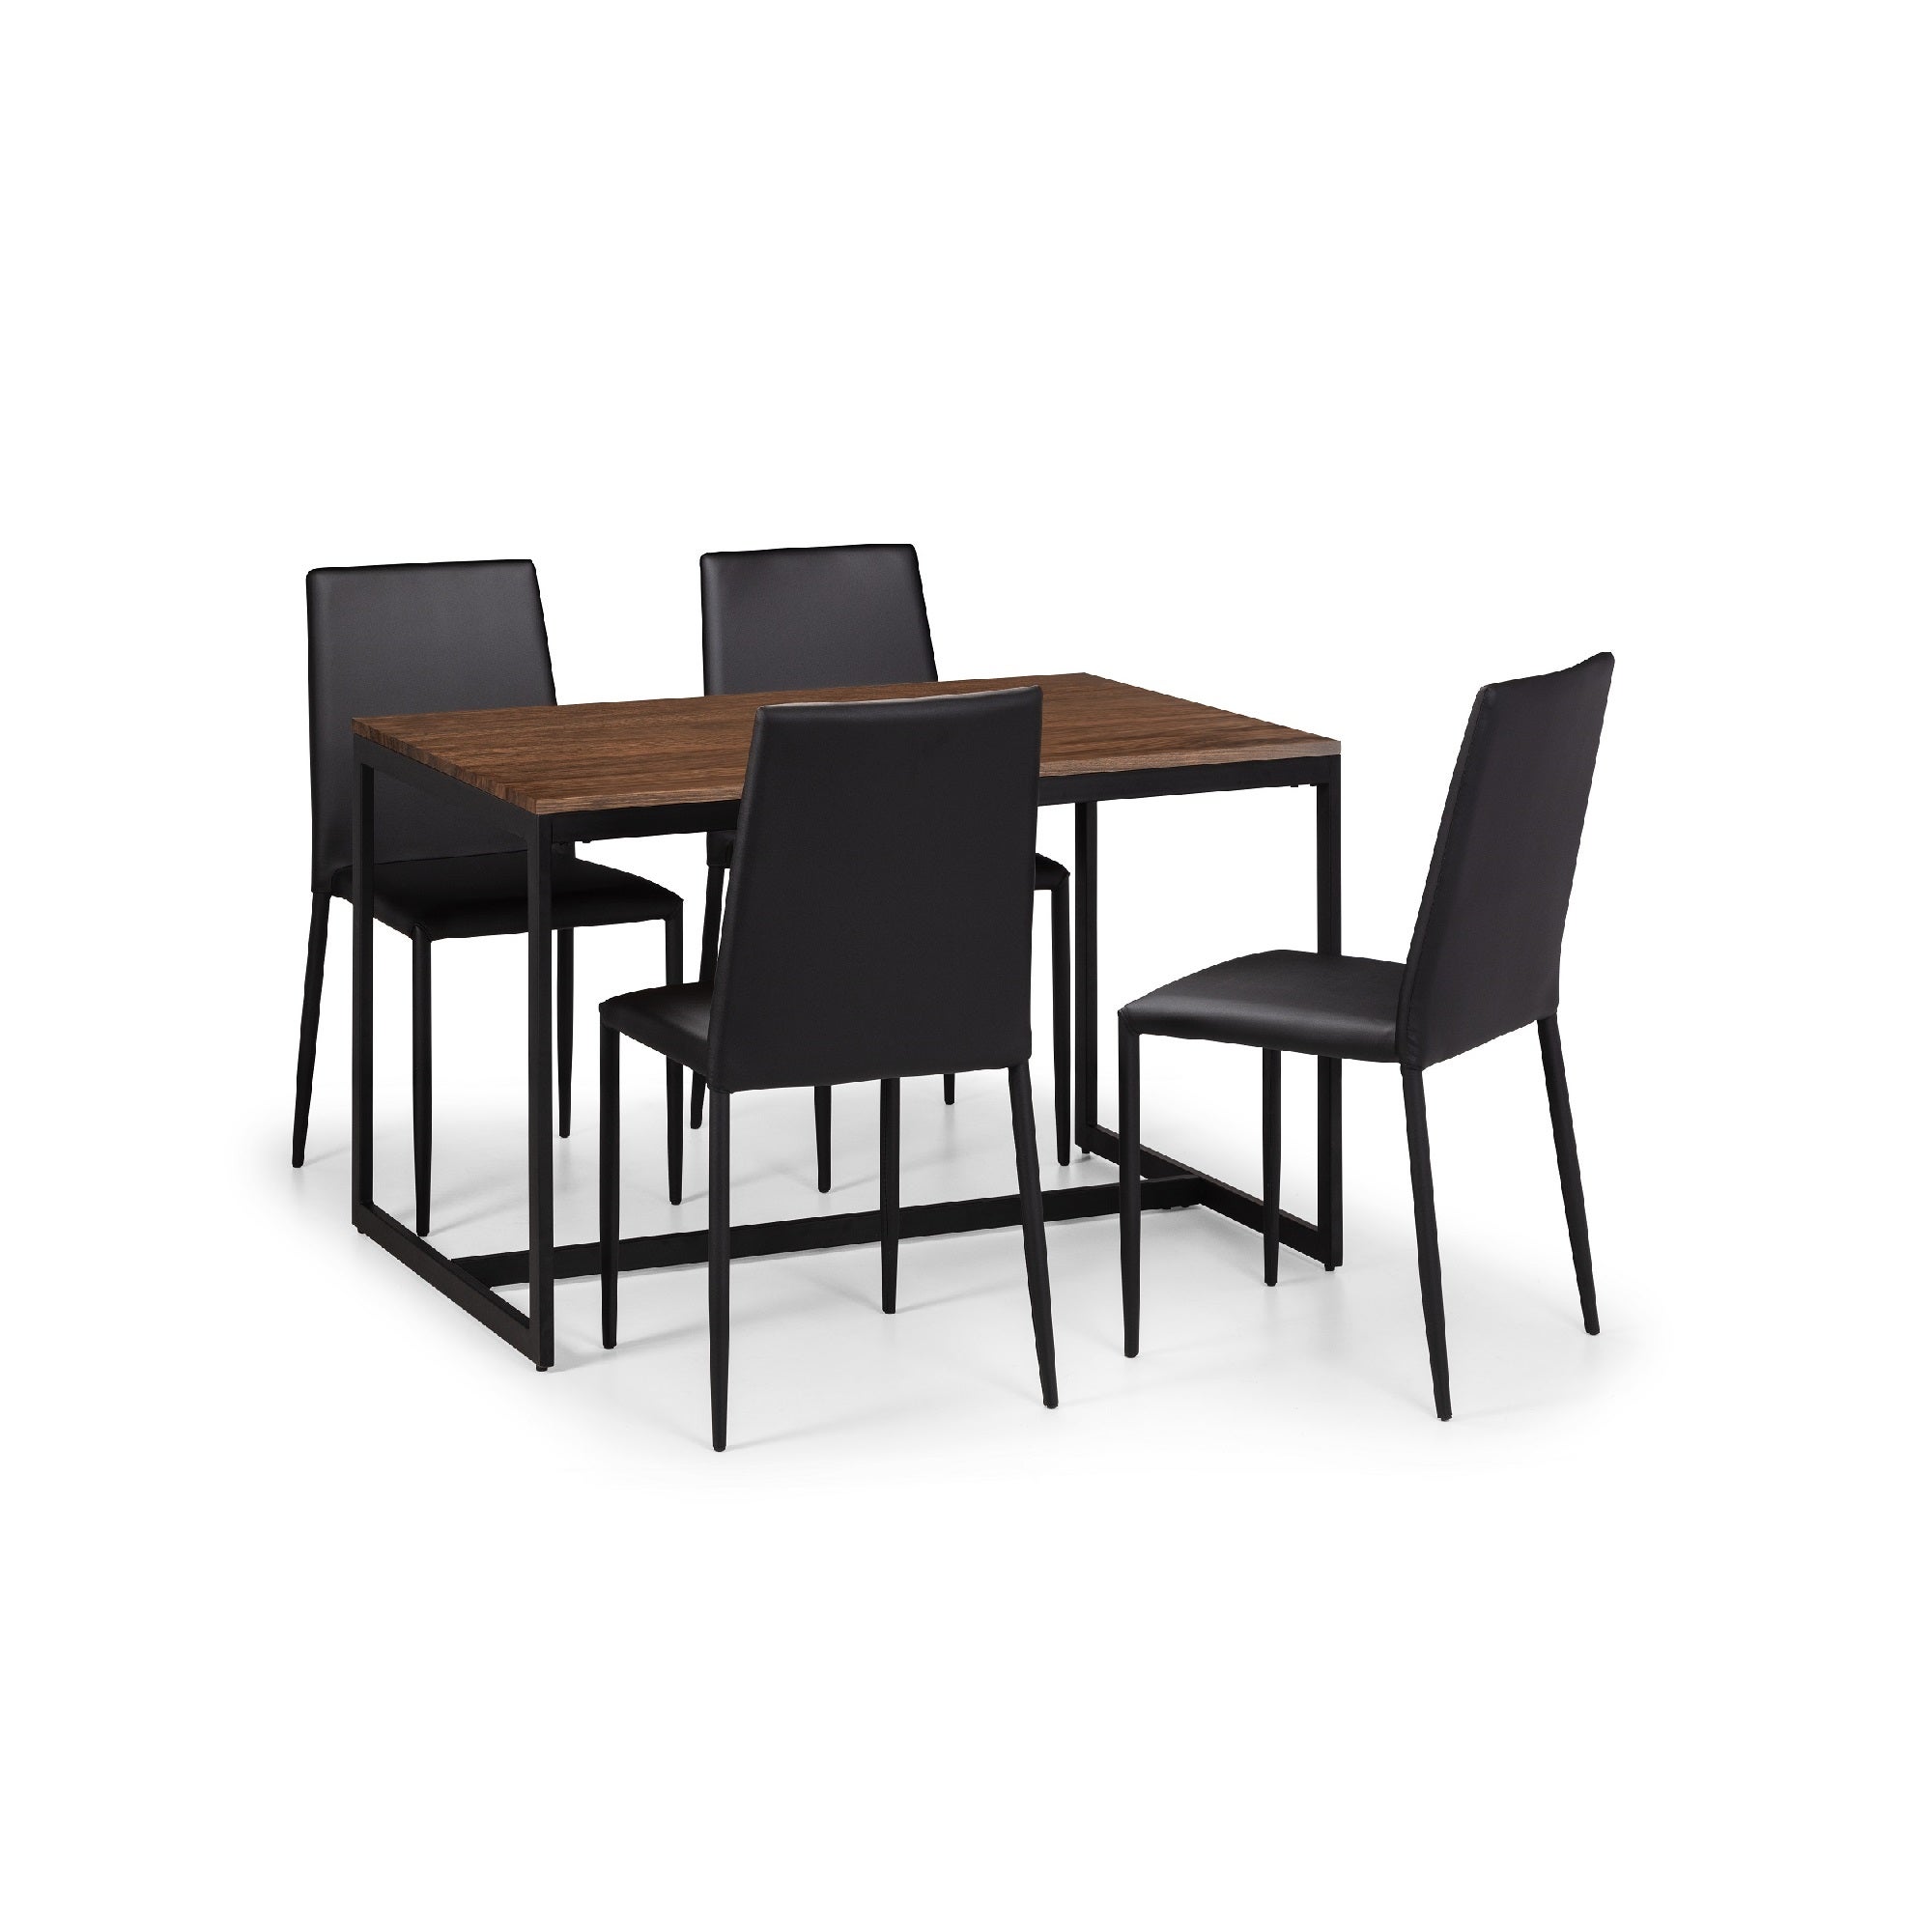 Tribeca Rectangular Dining Table With 4 Jazz Chairs Brown Brown